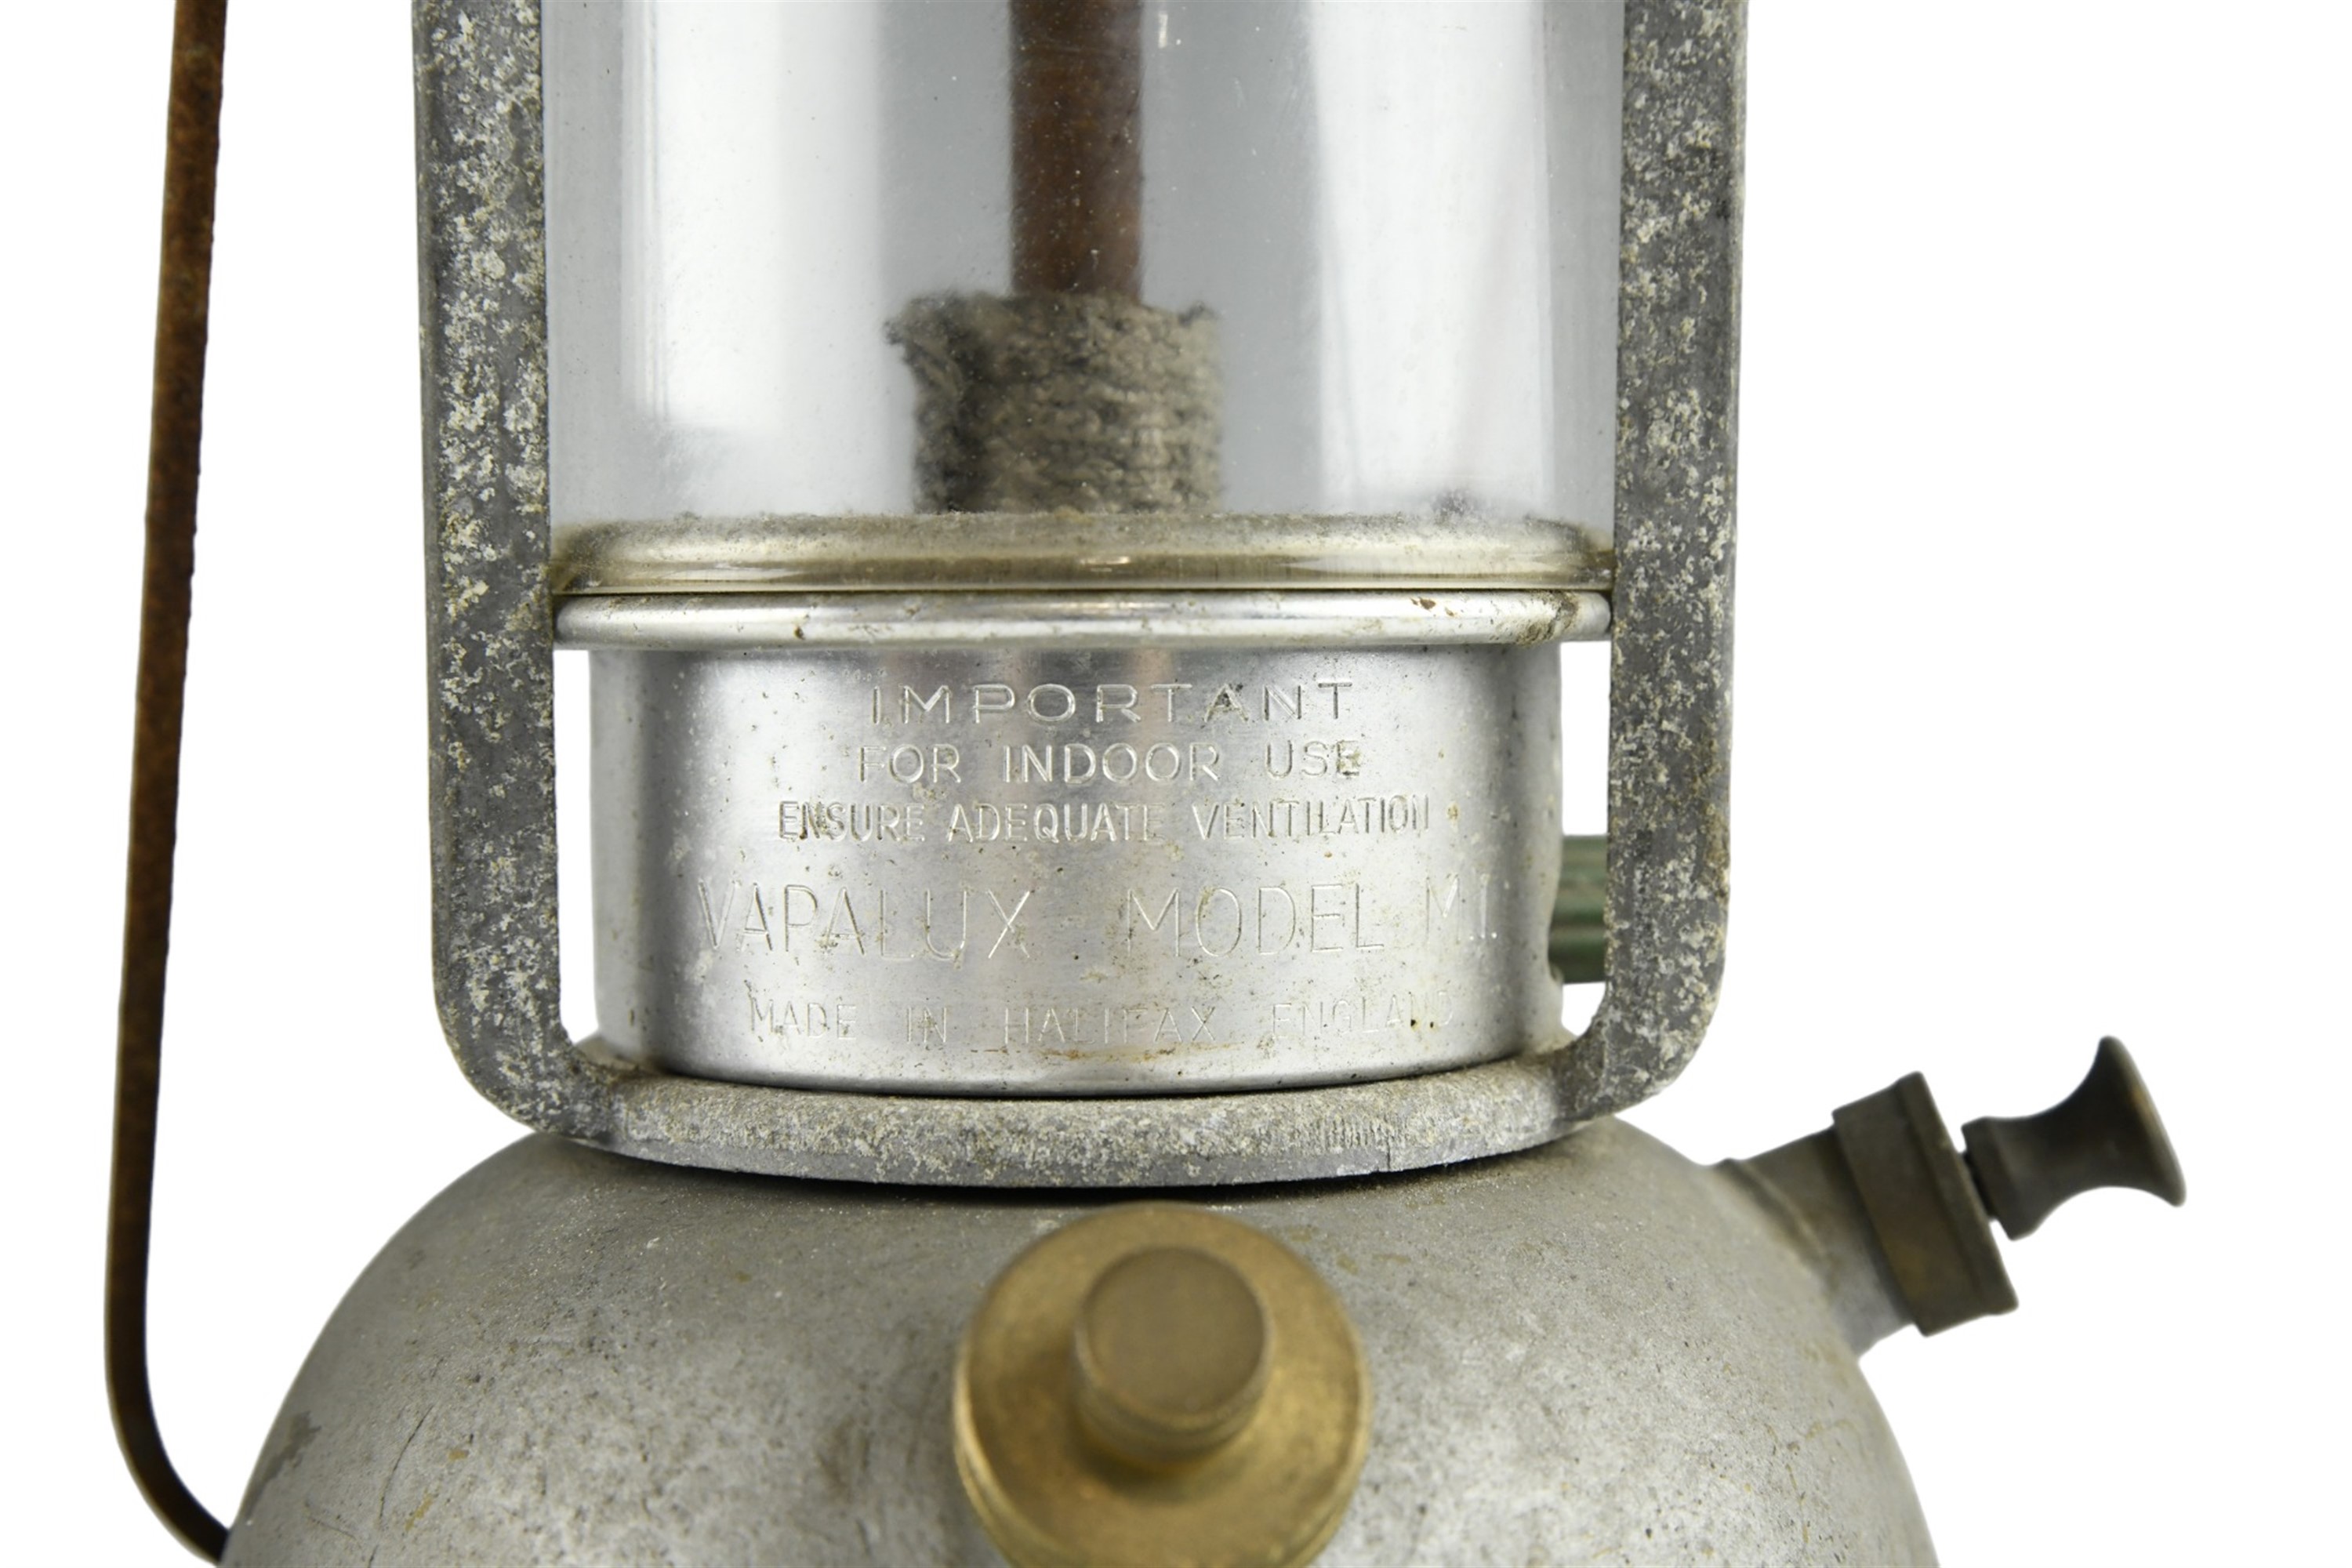 A Bialaddin Model 300X Paraffin pressure lamp together with a Varalux Model M1 - Image 3 of 3